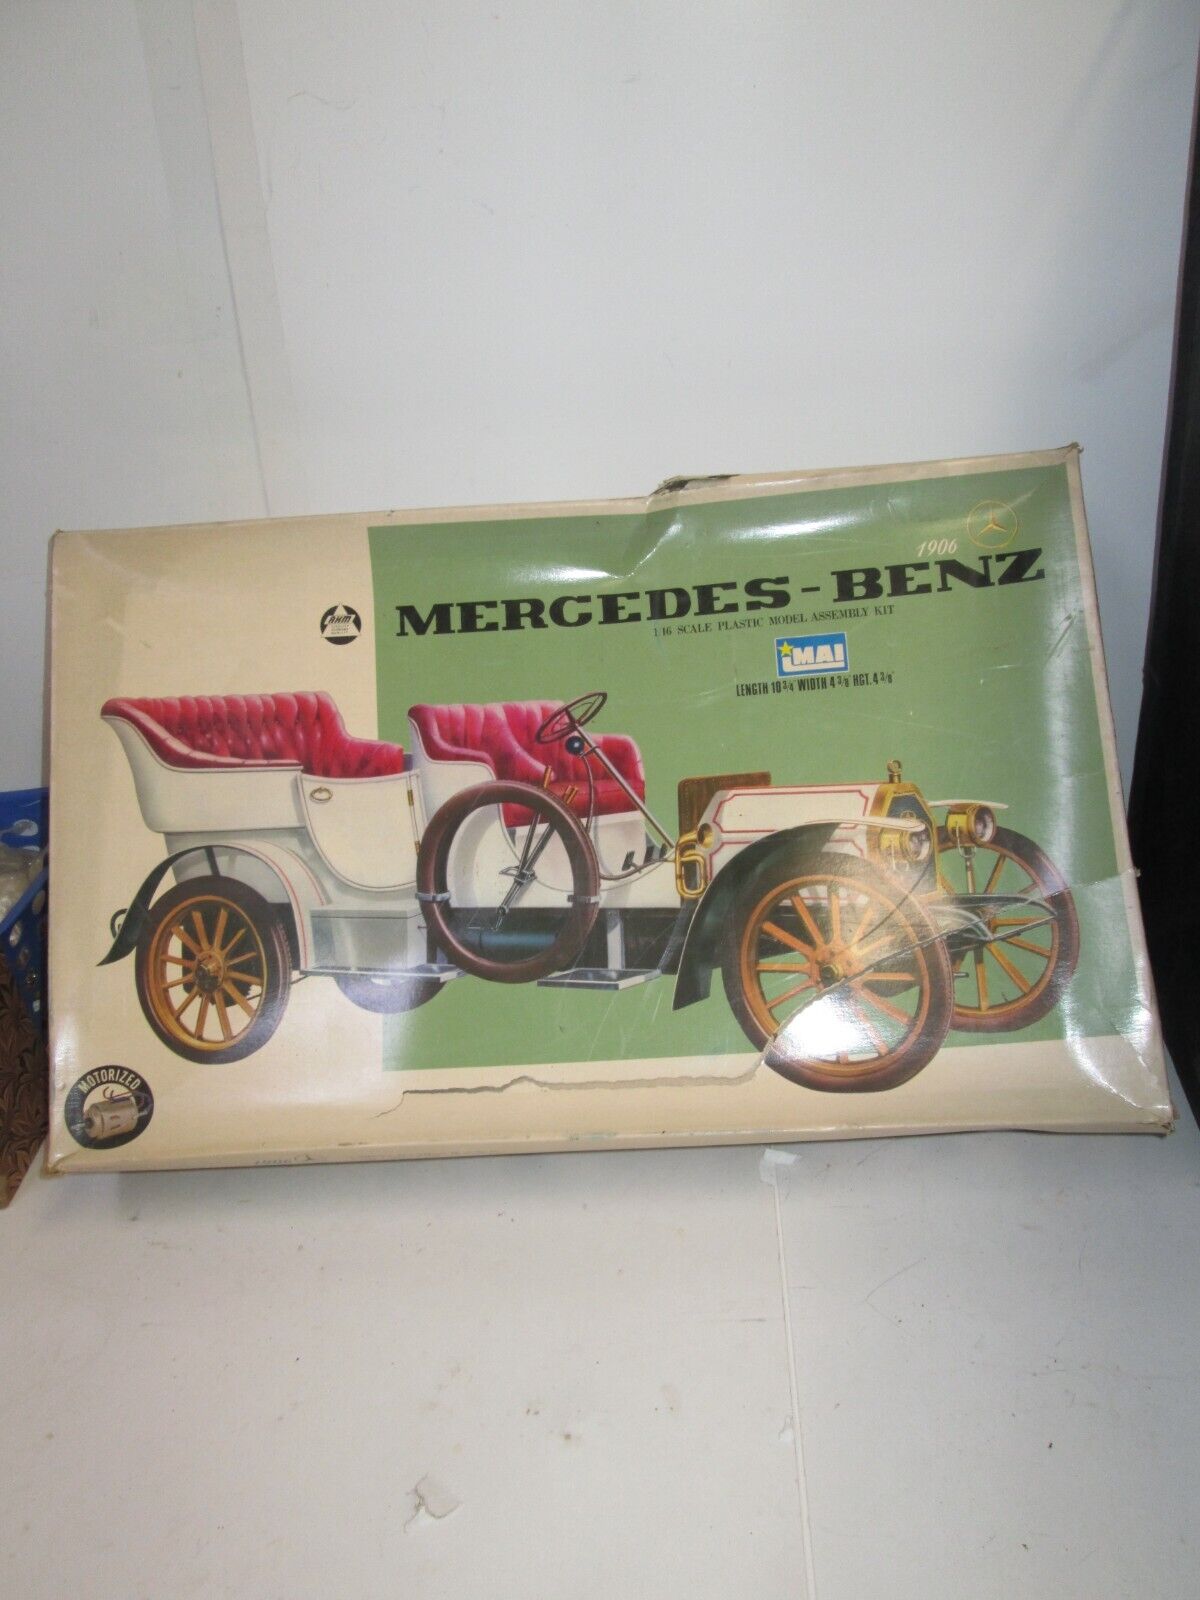 Vintage IMAI 1/16th SCALE 1906 Mercedes-Benz MODEL KIT W/MOTOR -New But Worn Box